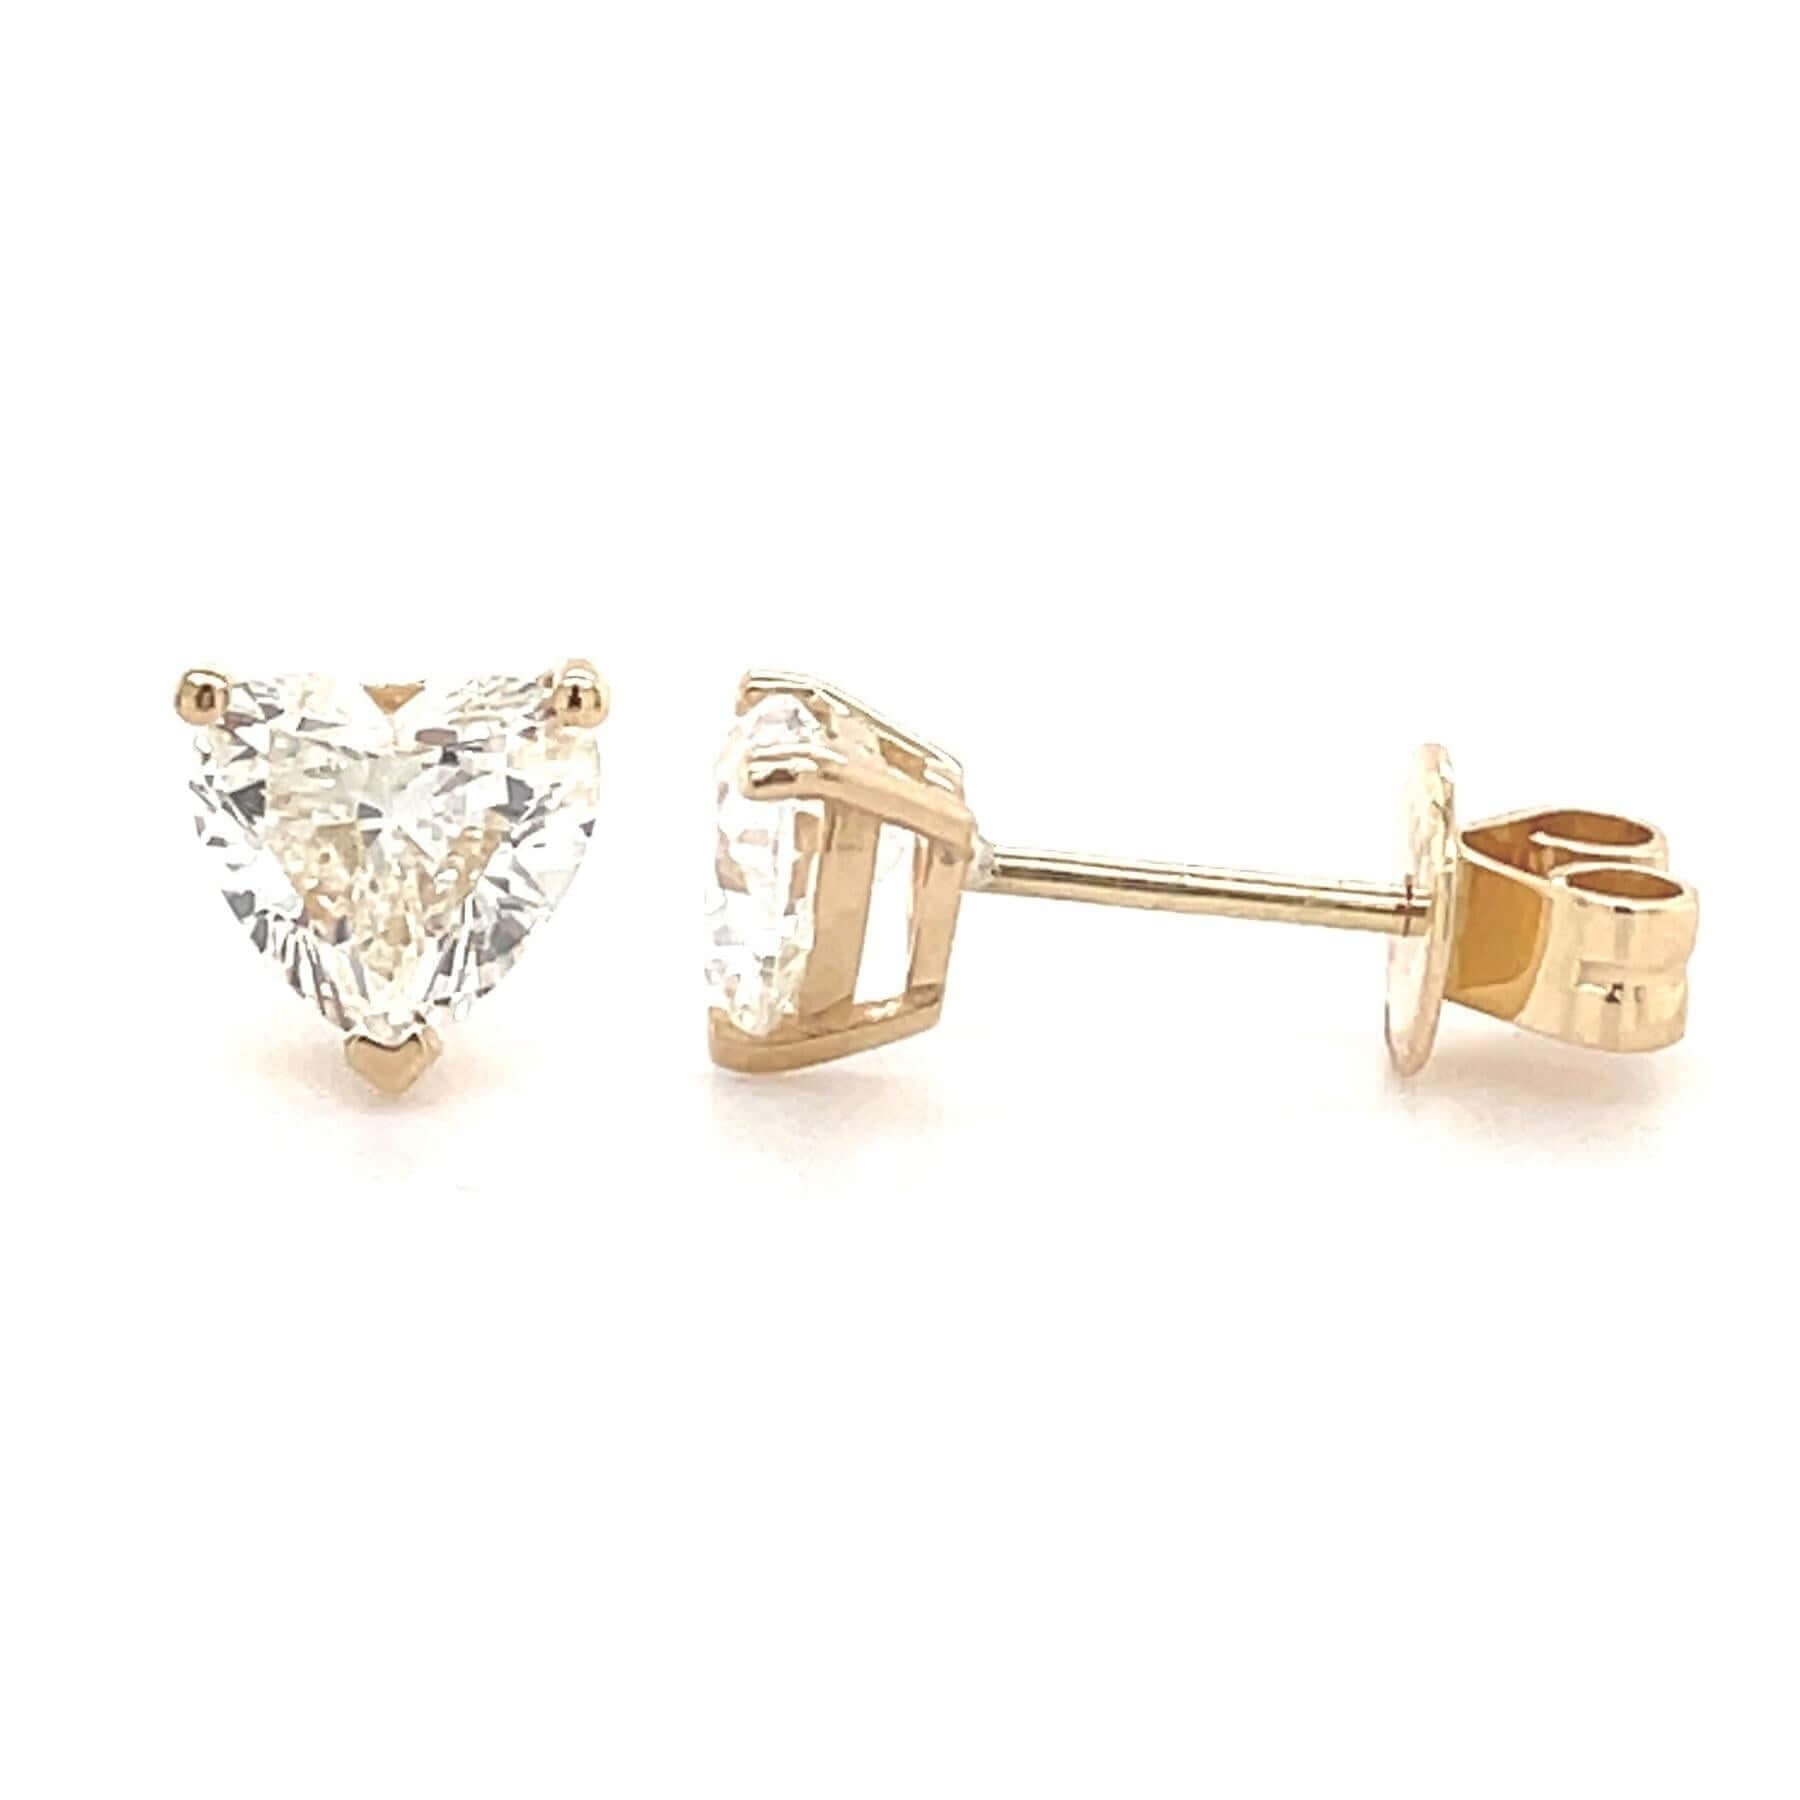 Solitaire Heart Cut Cz Stainless Steel Ear Stud Pair Earring – ZIVOM